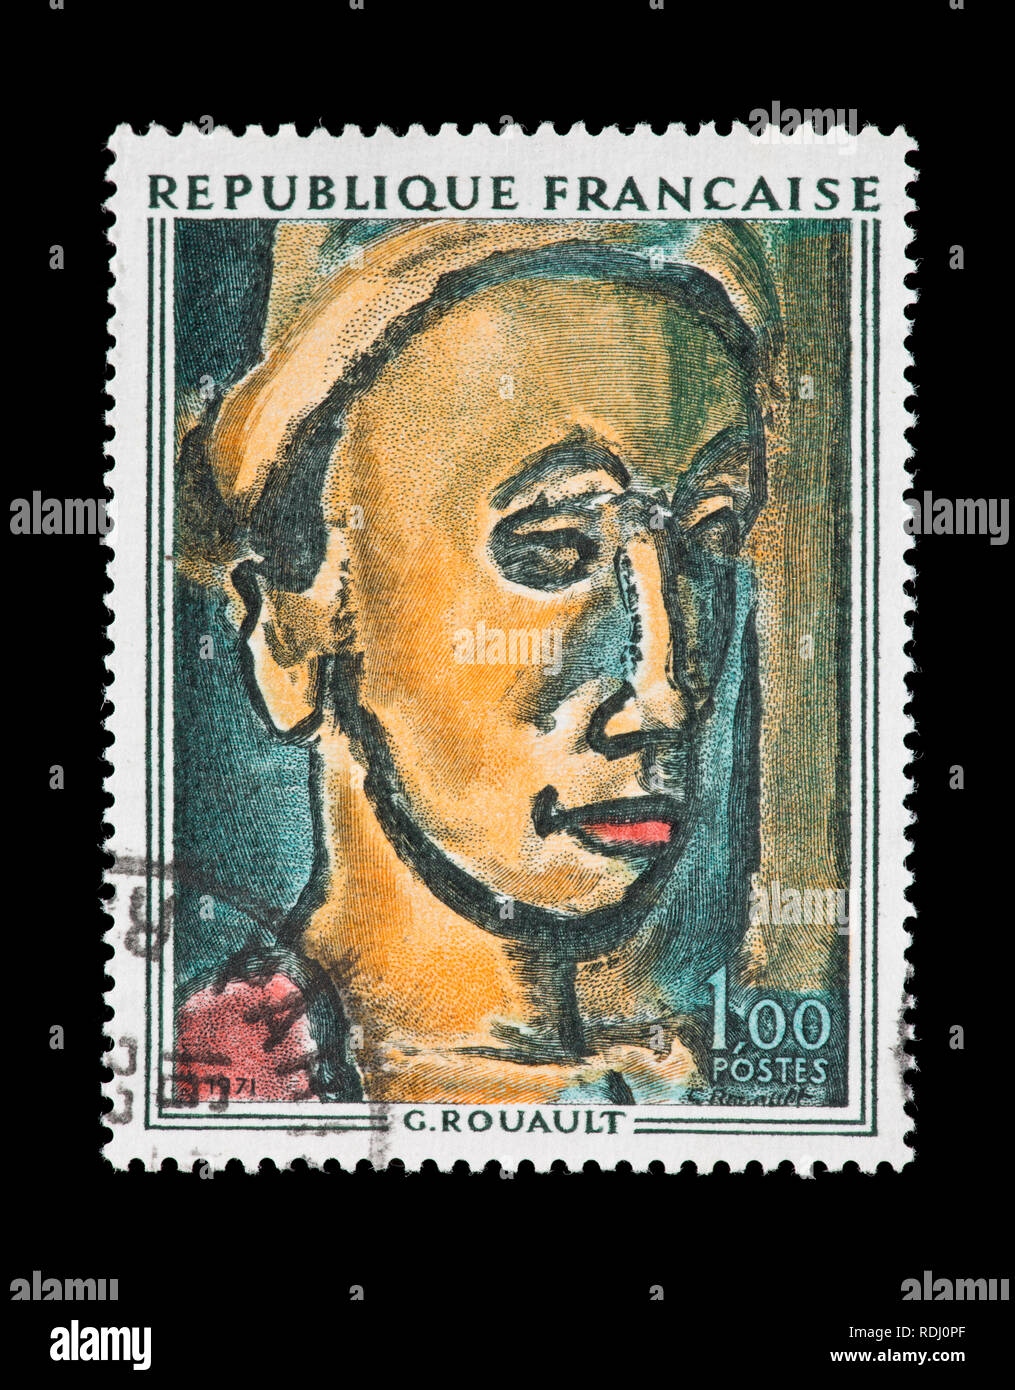 Postage stamp from France depicting the Georges Rouault painting 'The Dreamer' Stock Photo